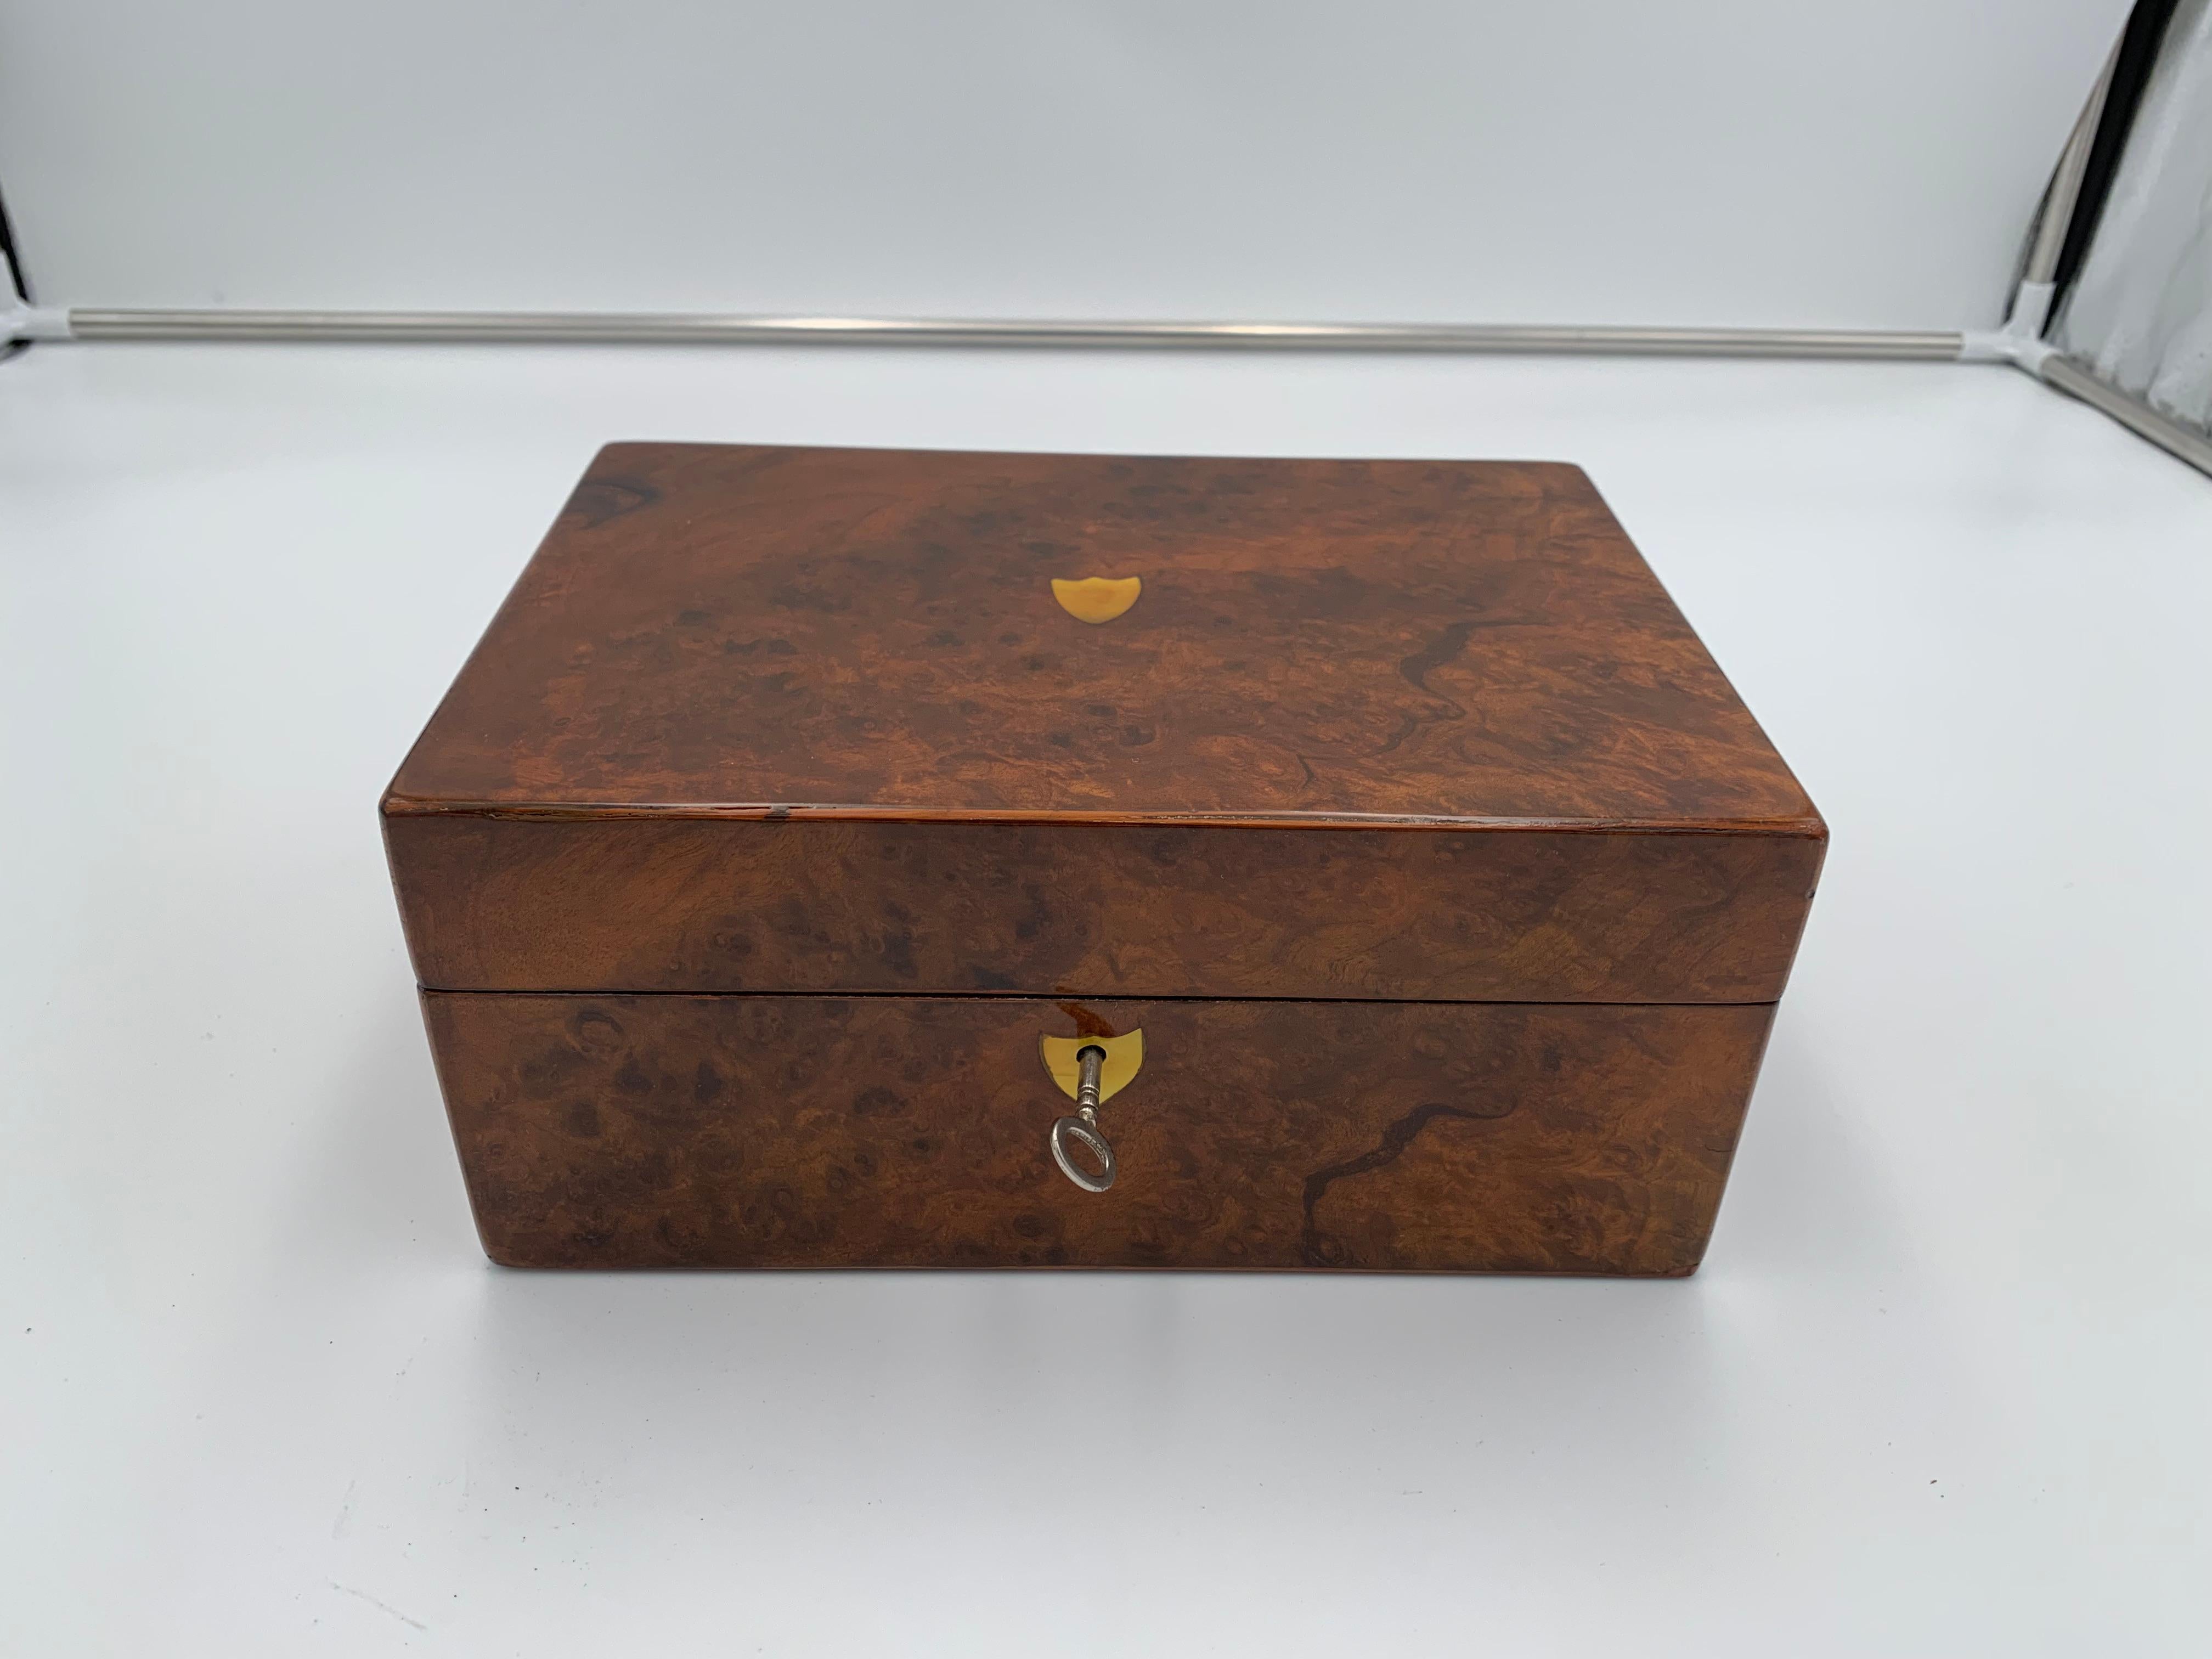 Biedermeier jewelry box, walnut roots, mother of pearl, South Germany circa 1830


Walnut roots veneer. Lid with inlaid mother-of-pearl coat of arms. Working old lock. Restored and shellac hand-polished.

Dimensions: H 10.7 x W 24.5 x D 17 cm.